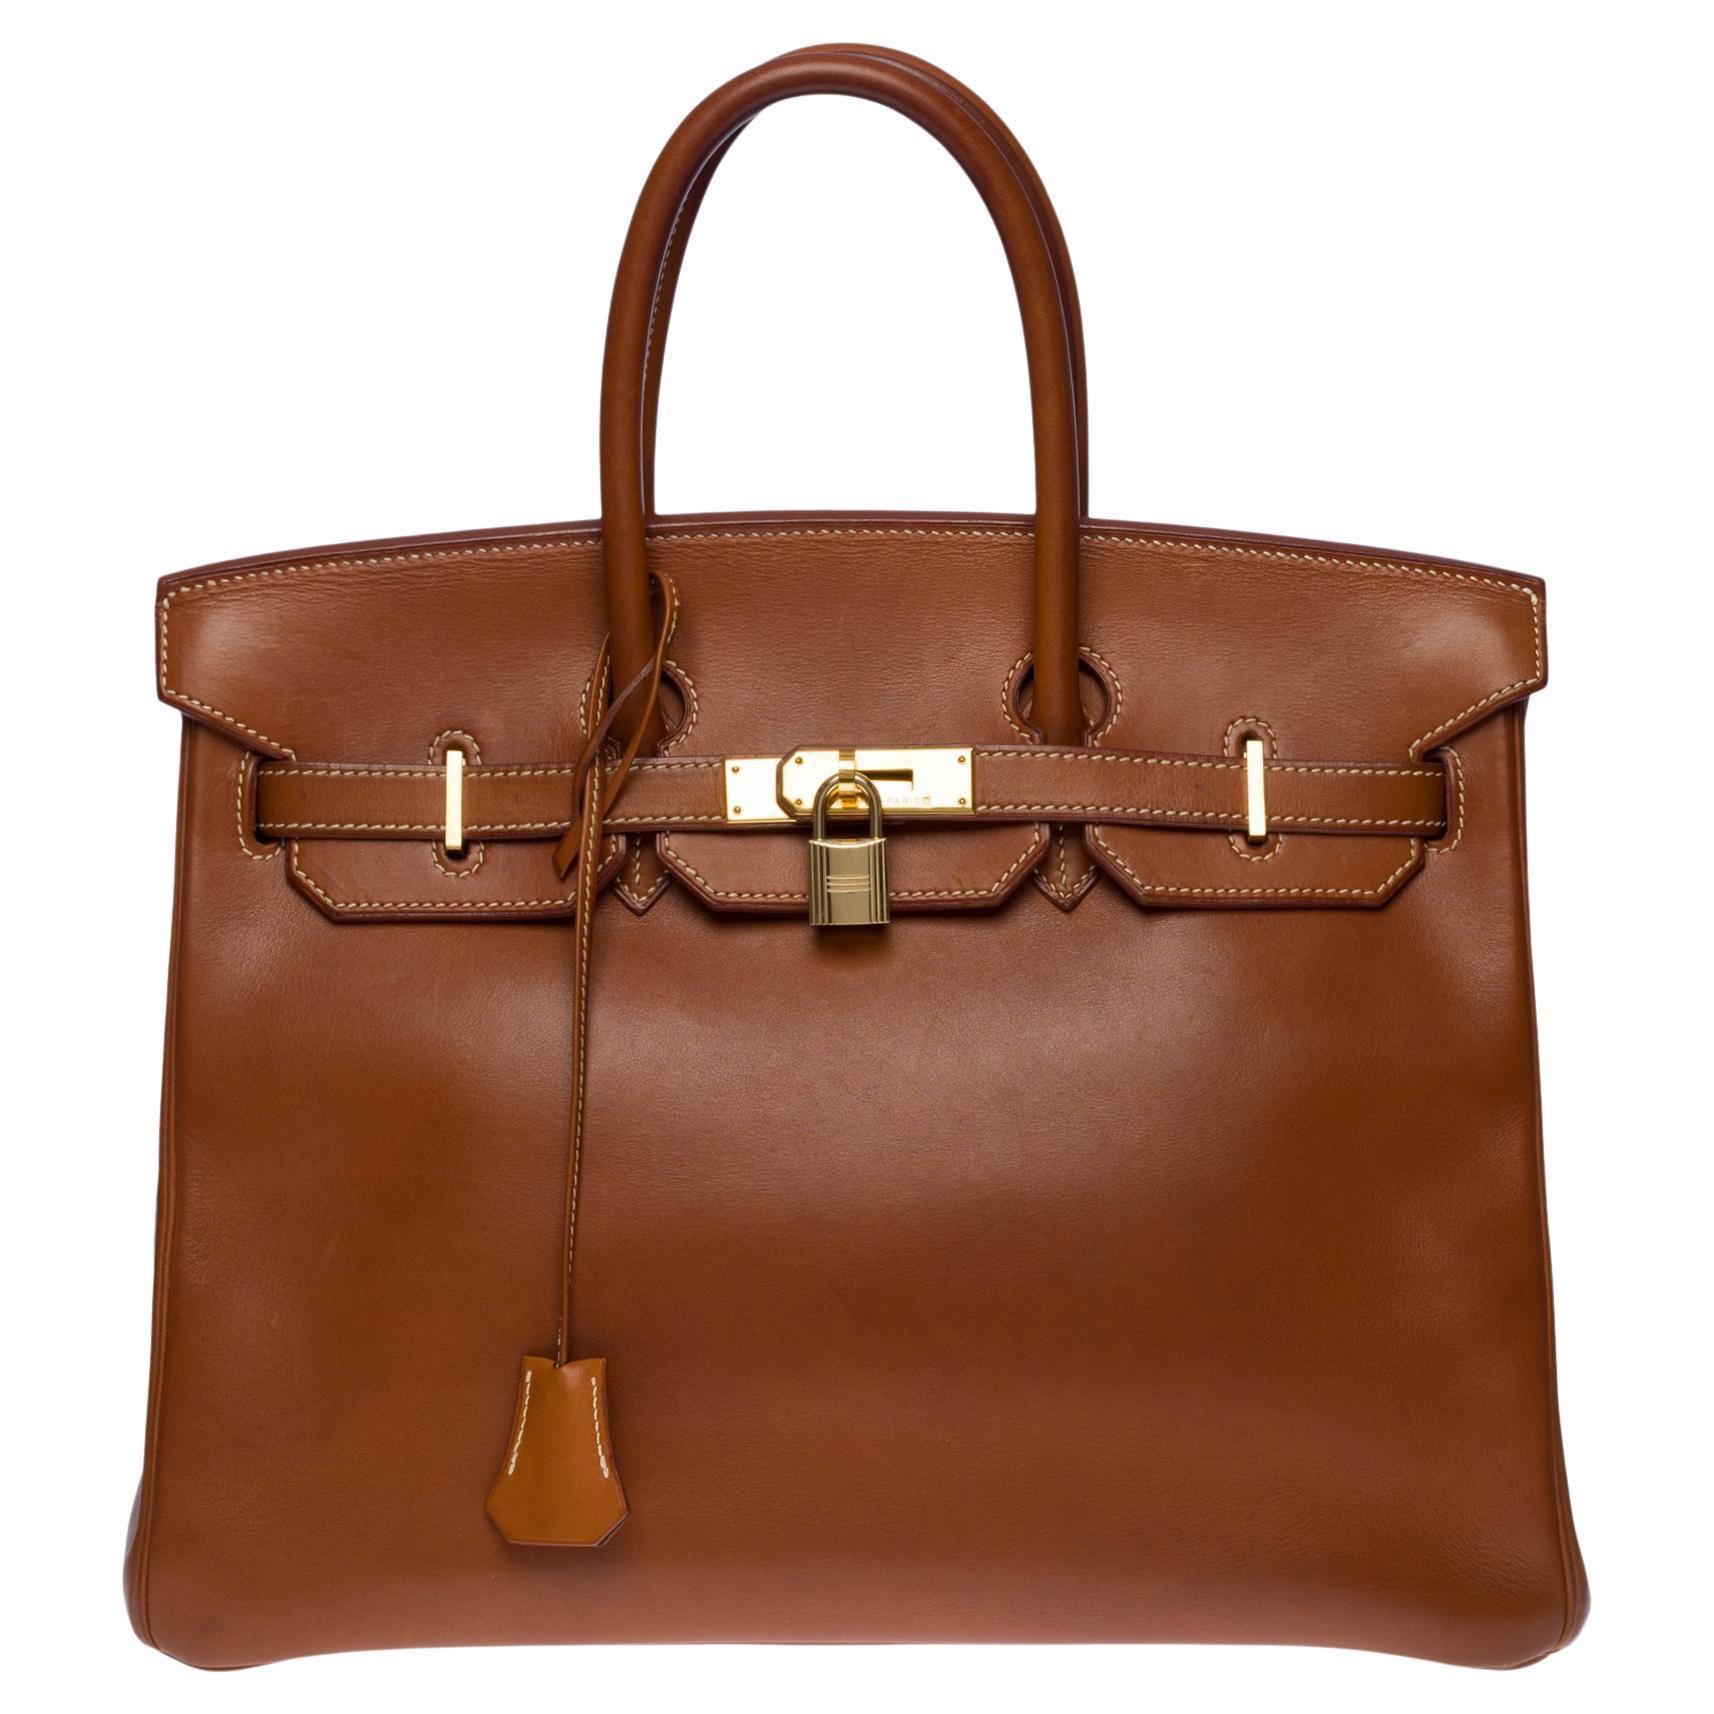 Rare and Exceptional Hermès Birkin 35 handbag in Gold Barenia leather, GHW  at 1stDibs